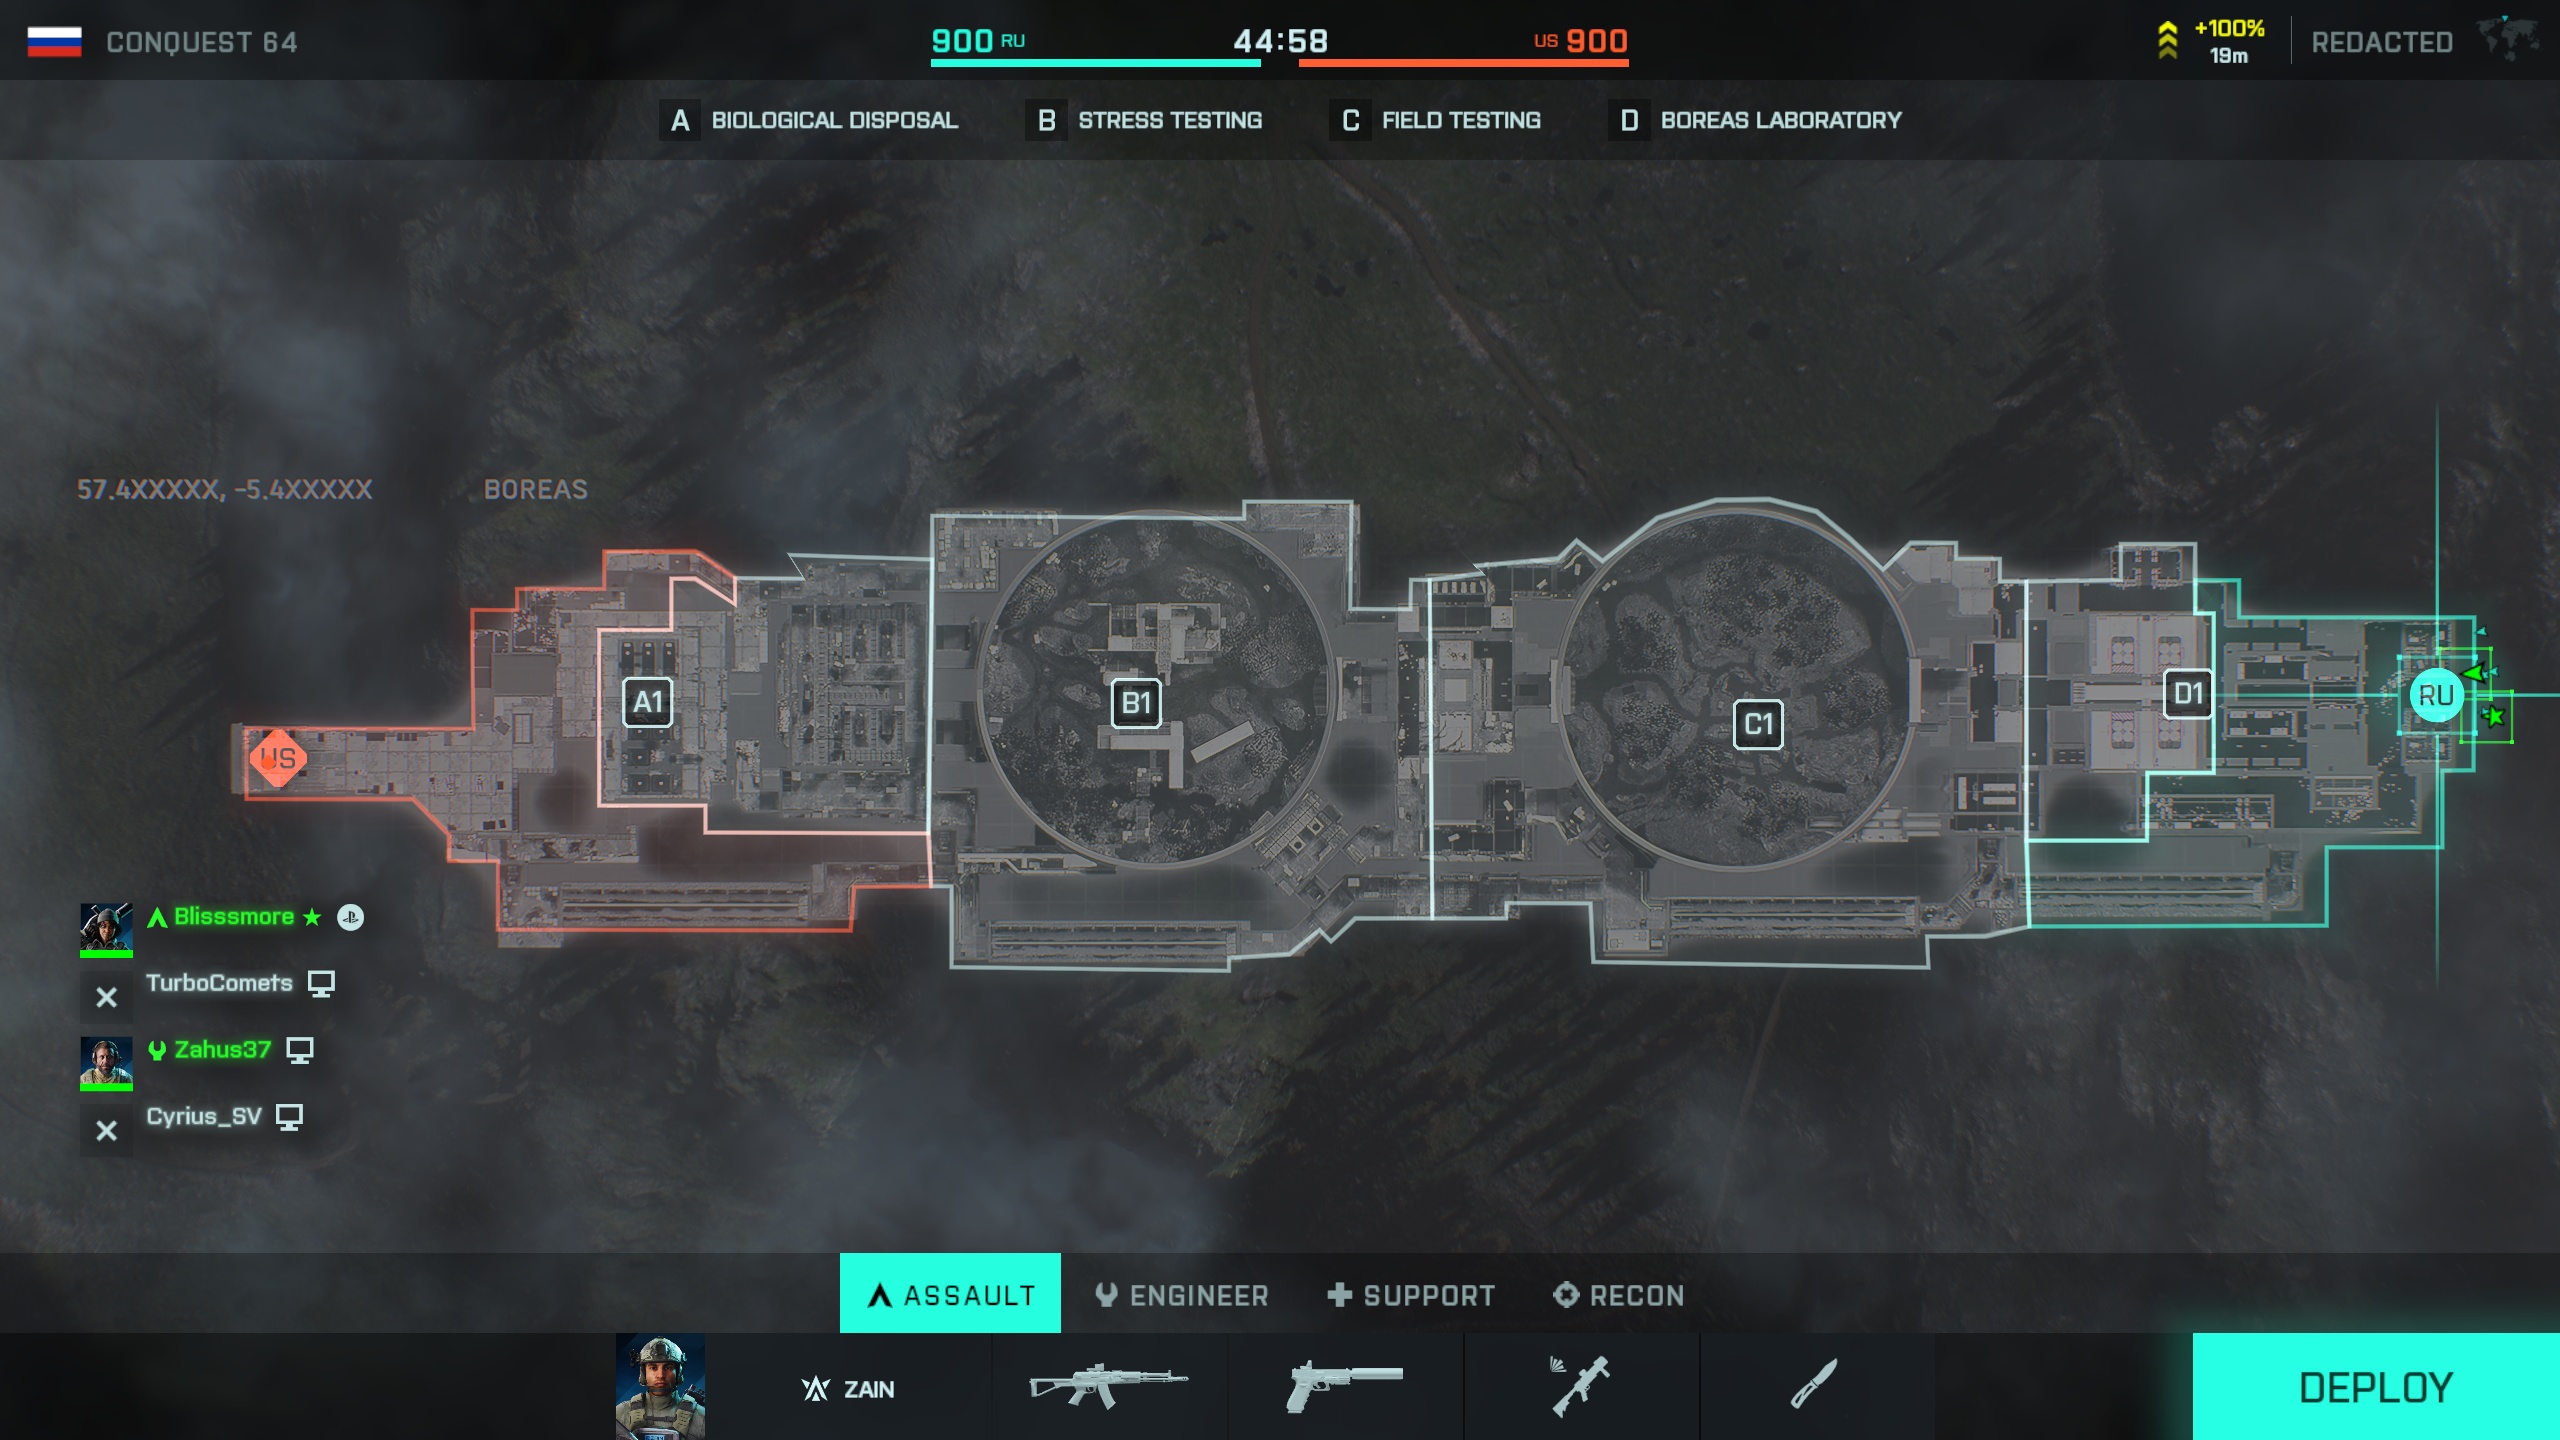 (The layout of the new map Redacted in Conquest mode.)